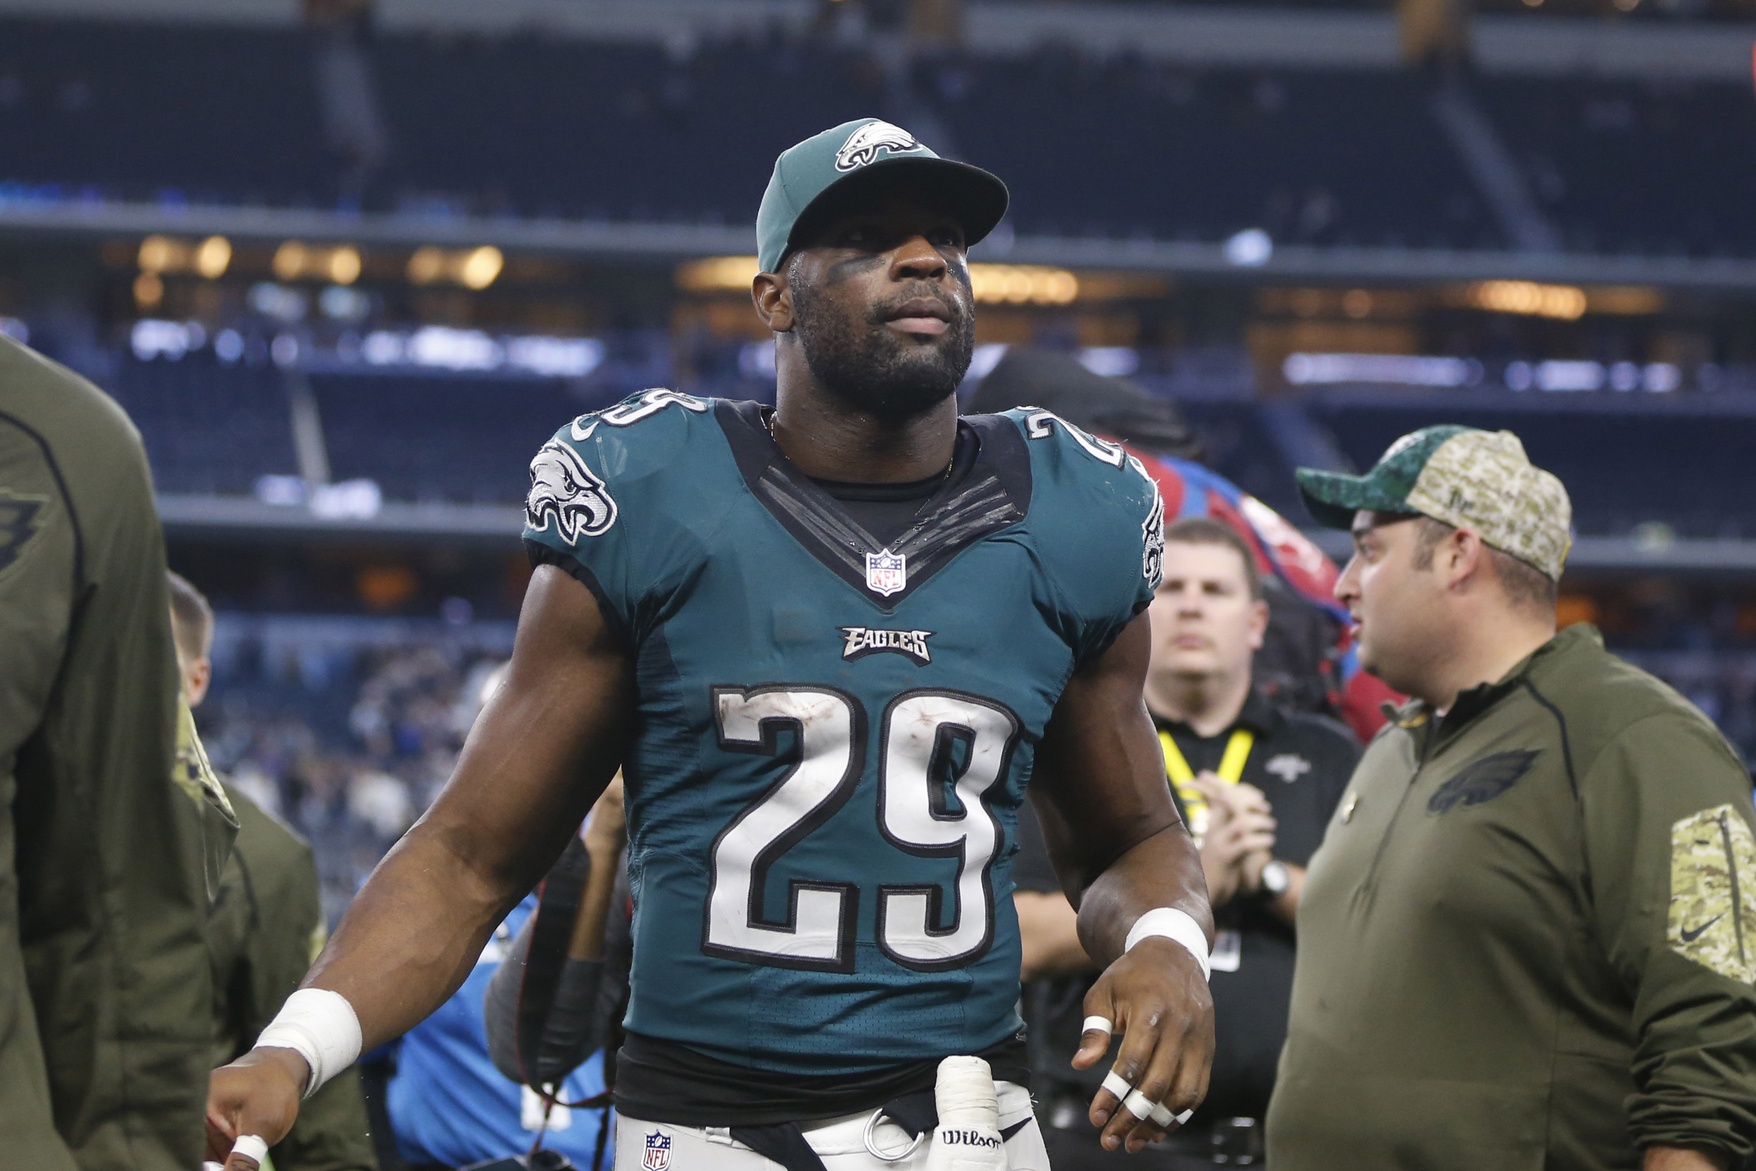 Nov 8, 2015; Arlington, TX, USA; Philadelphia Eagles running back DeMarco Murray (29) leaves the field after the game against the Dallas Cowboys at AT&T Stadium. Philadelphia won in overtime 33-27. Mandatory Credit: Tim Heitman-USA TODAY Sports